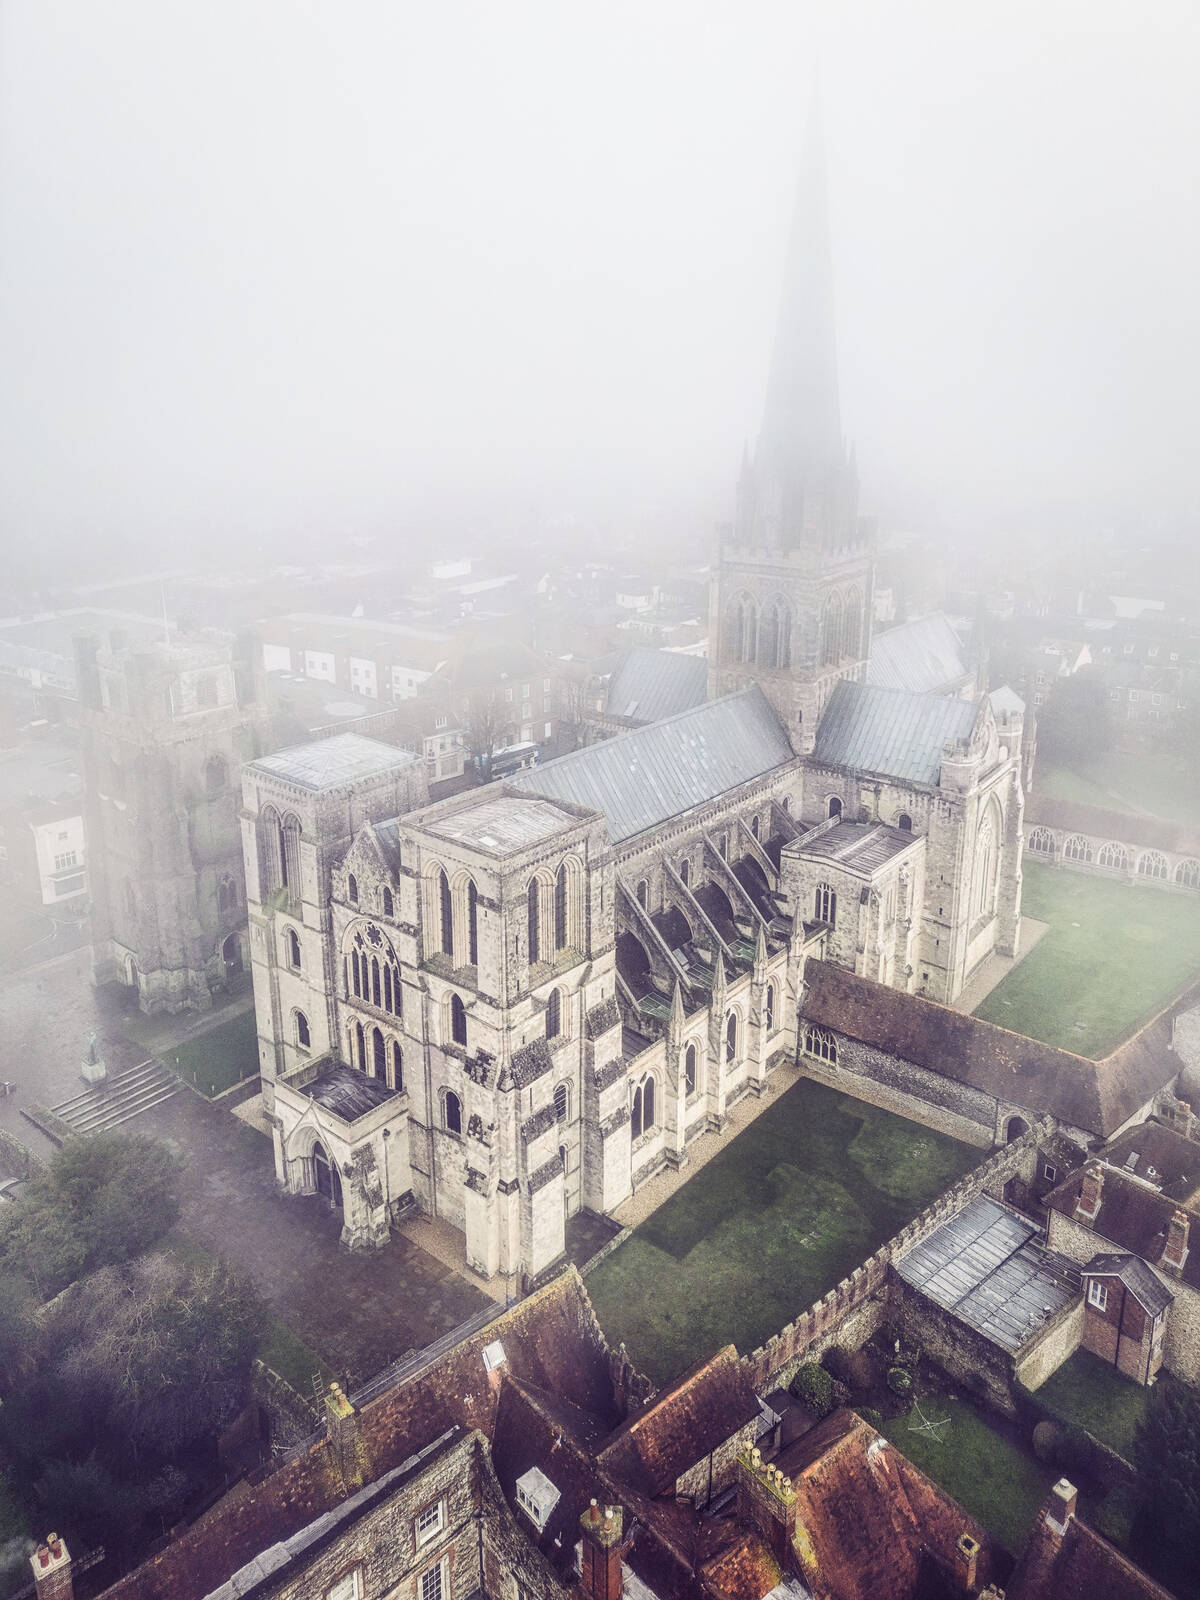 Image of Chichester Cathedral by Jakub Bors